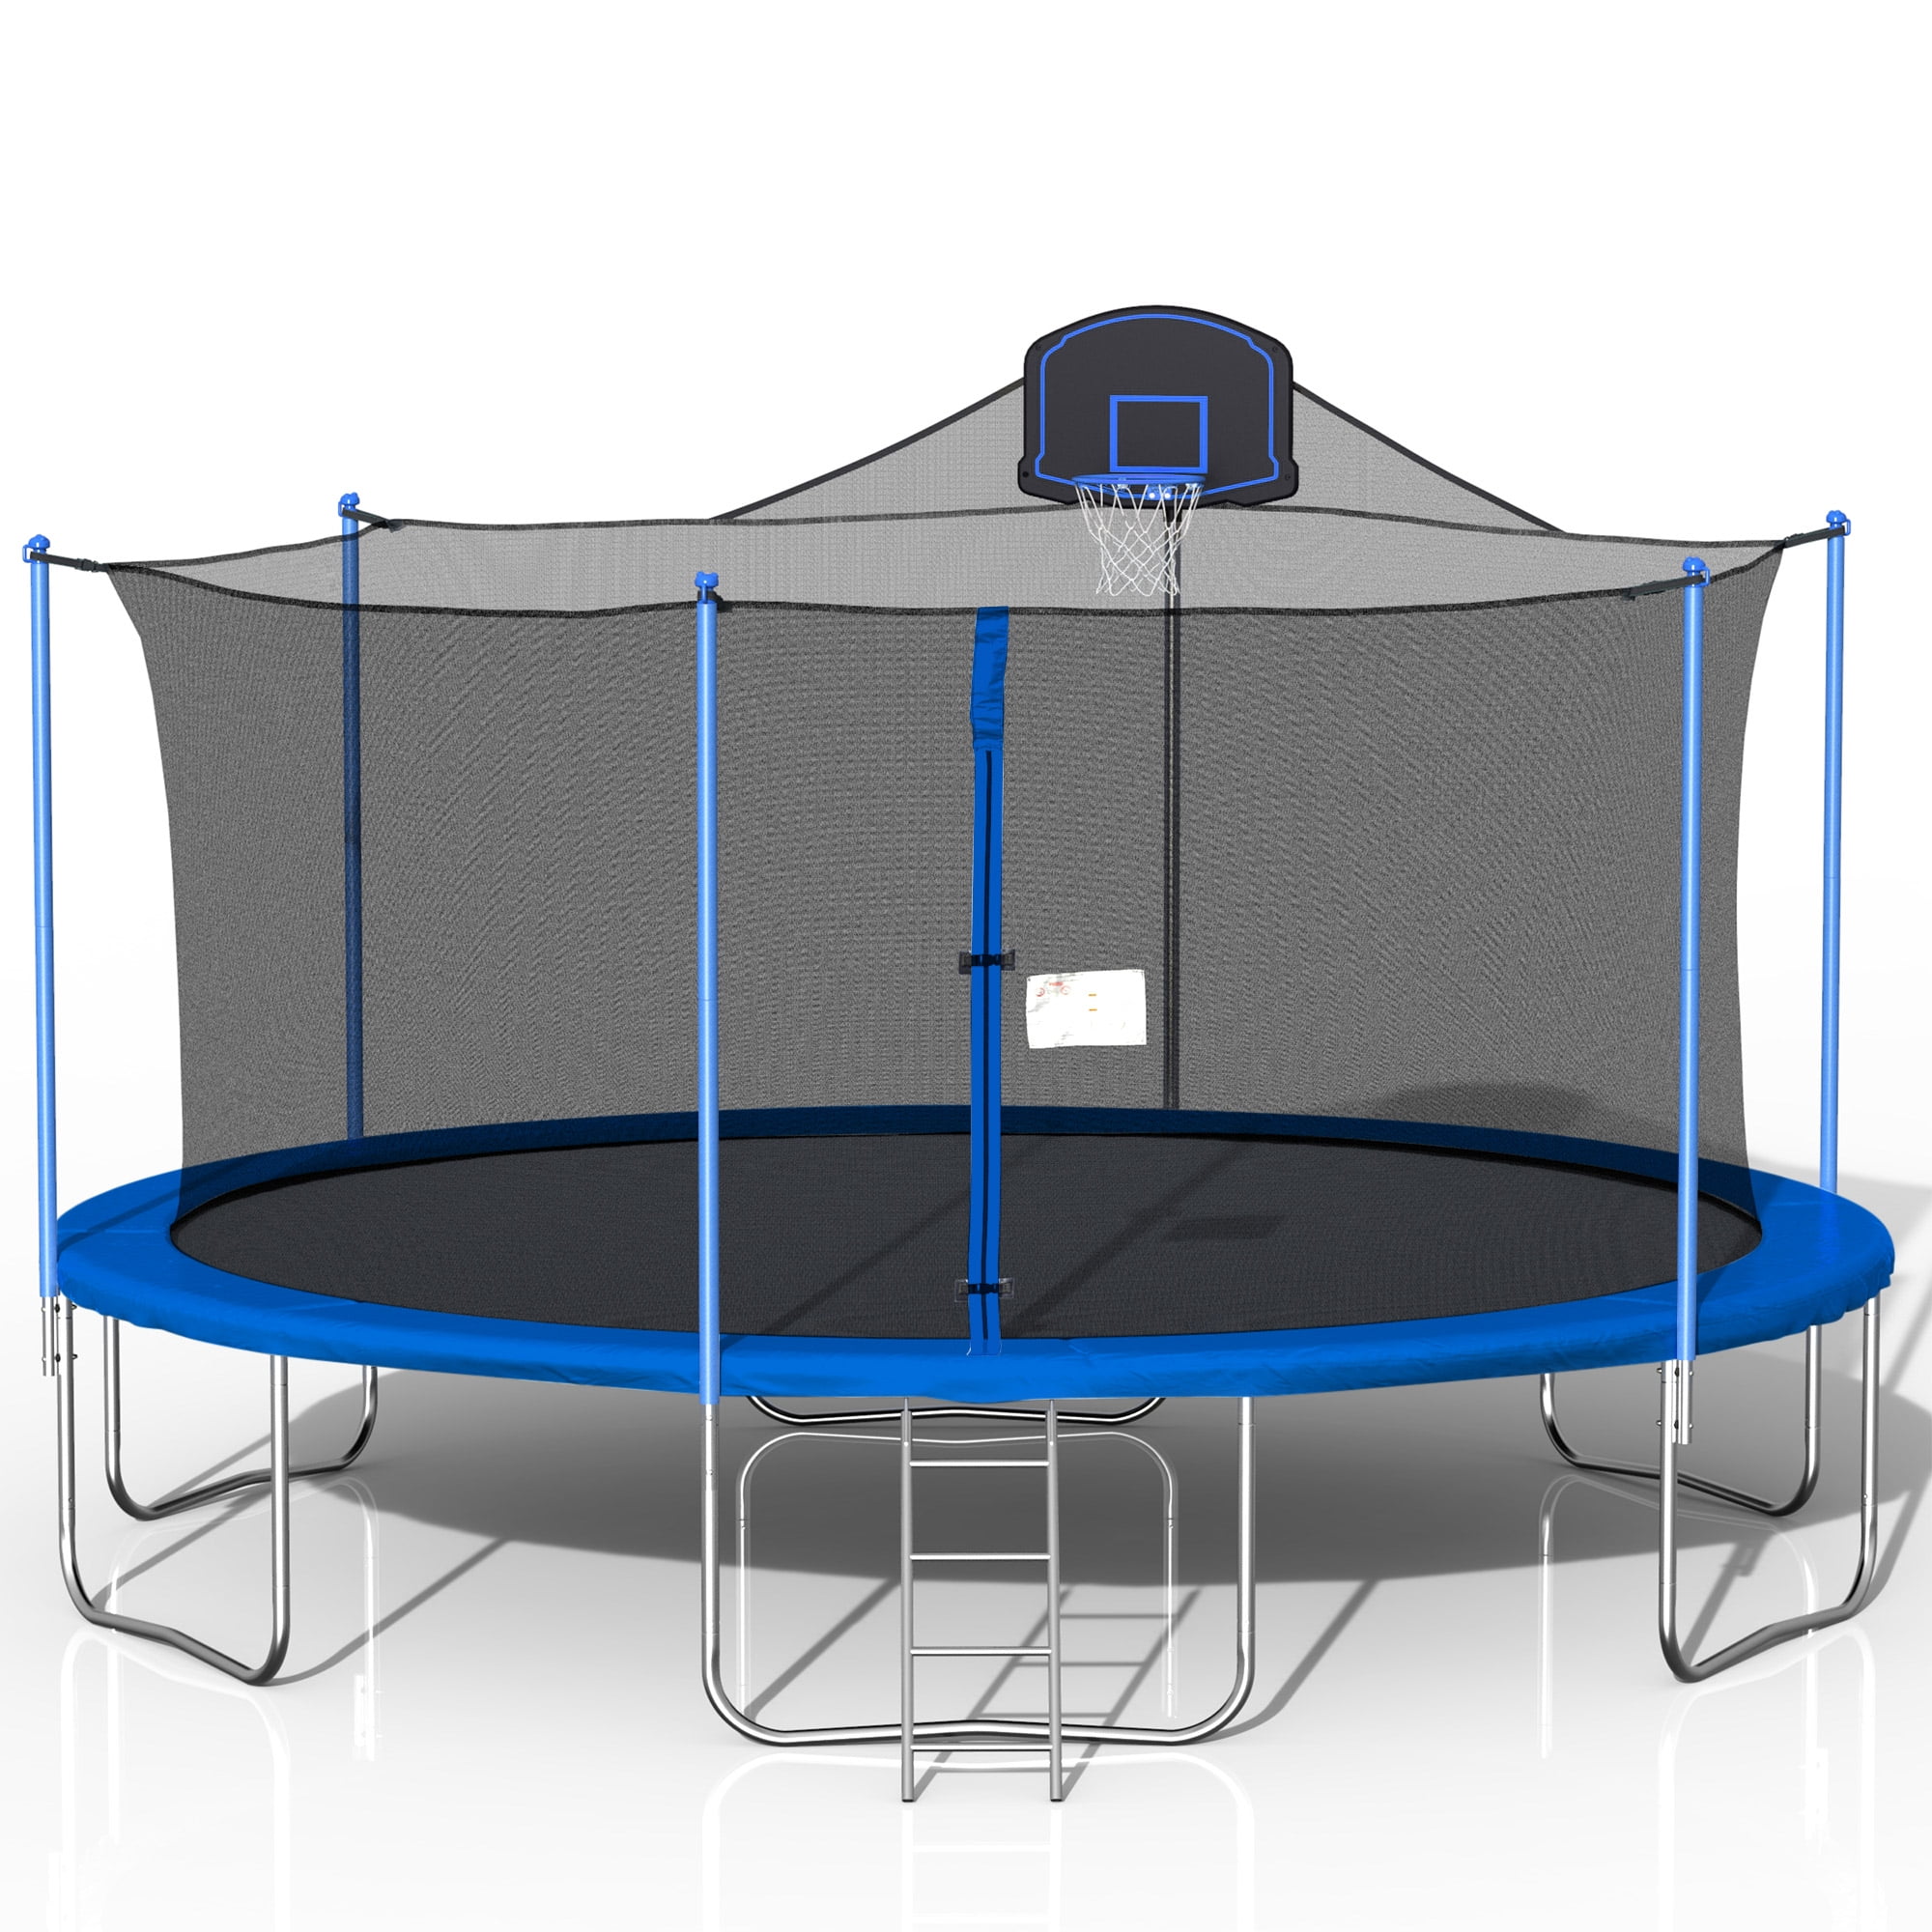 16-Foot Kids Trampoline with Basketball Hoop, Outdoor Trampoline with Safety Enclosure Net, Circular Trampolines for Adults Kids, Family Jumping and Ladder, Kids Basketball Trampoline, Q11385